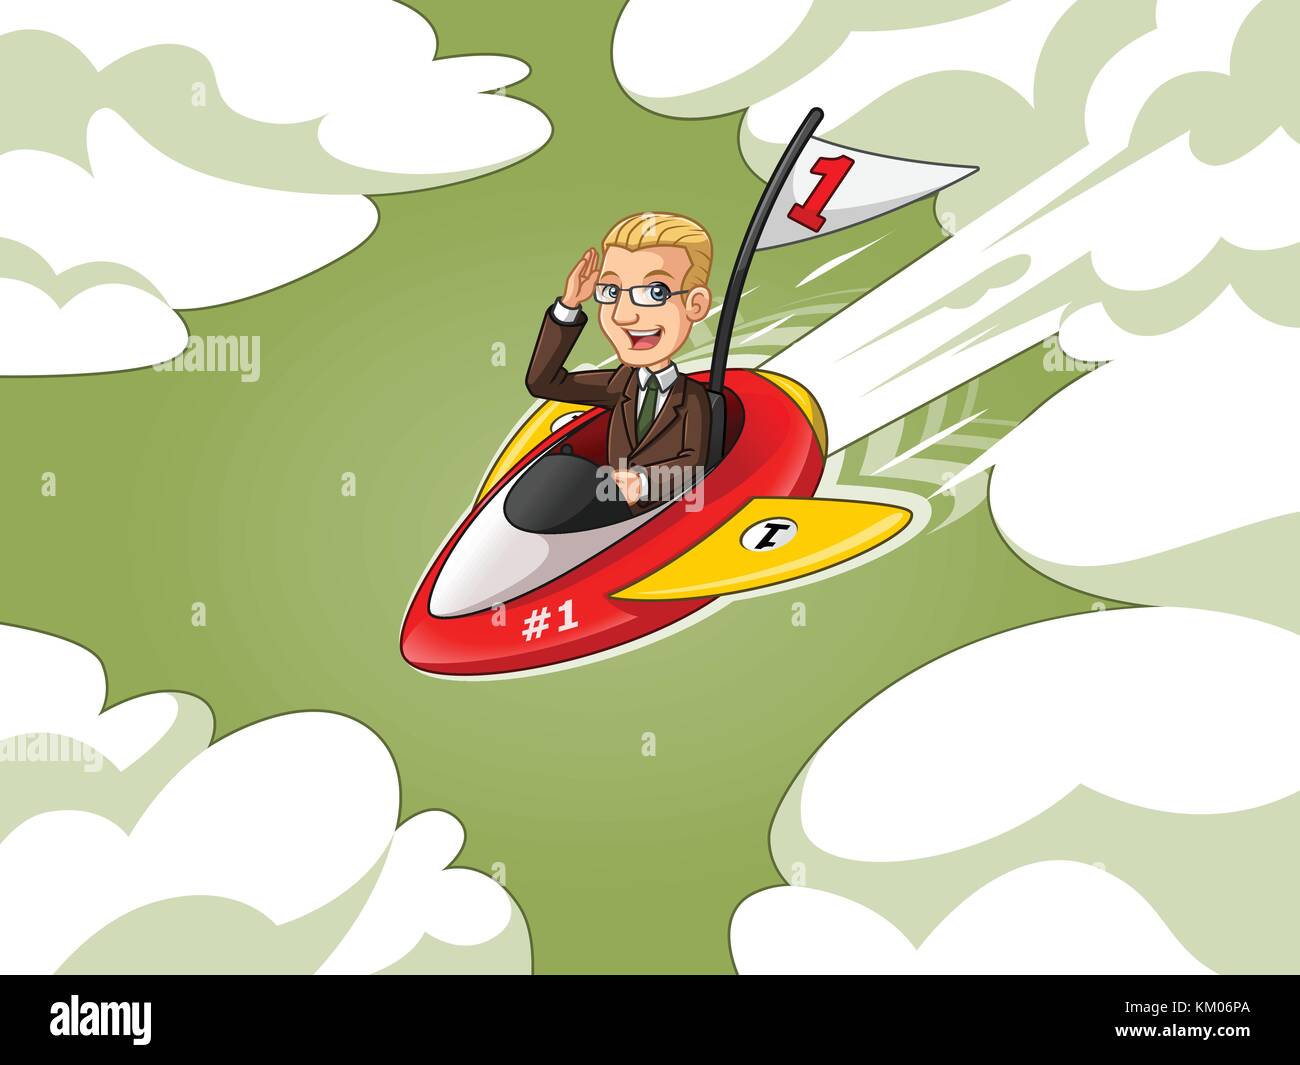 Blonde businessman in brown suit cartoon character design riding a rocket with number one flag flying through the sky, against green background. Stock Vector